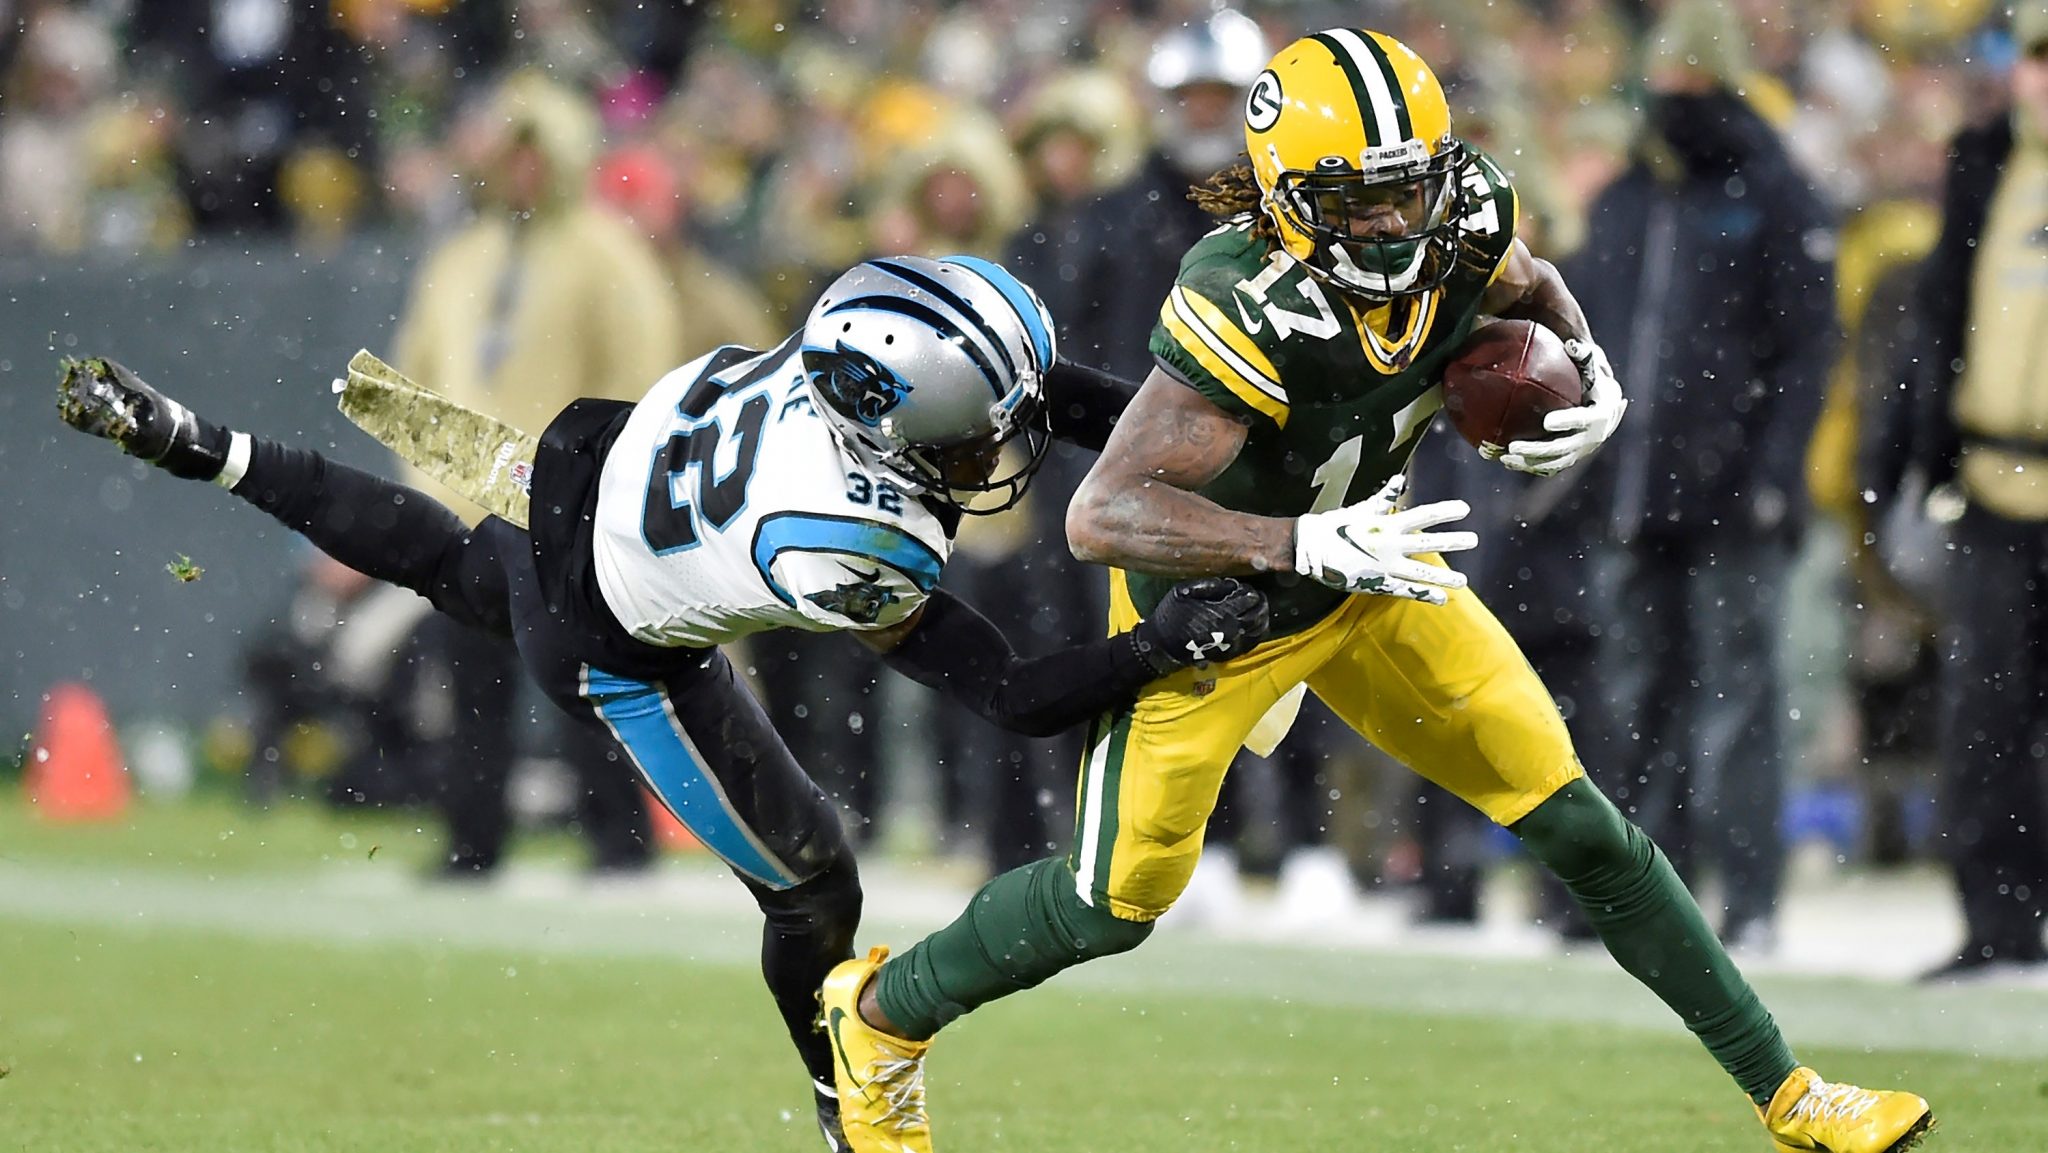 Panthers vs Packers live stream how to watch NFL week 15 game online